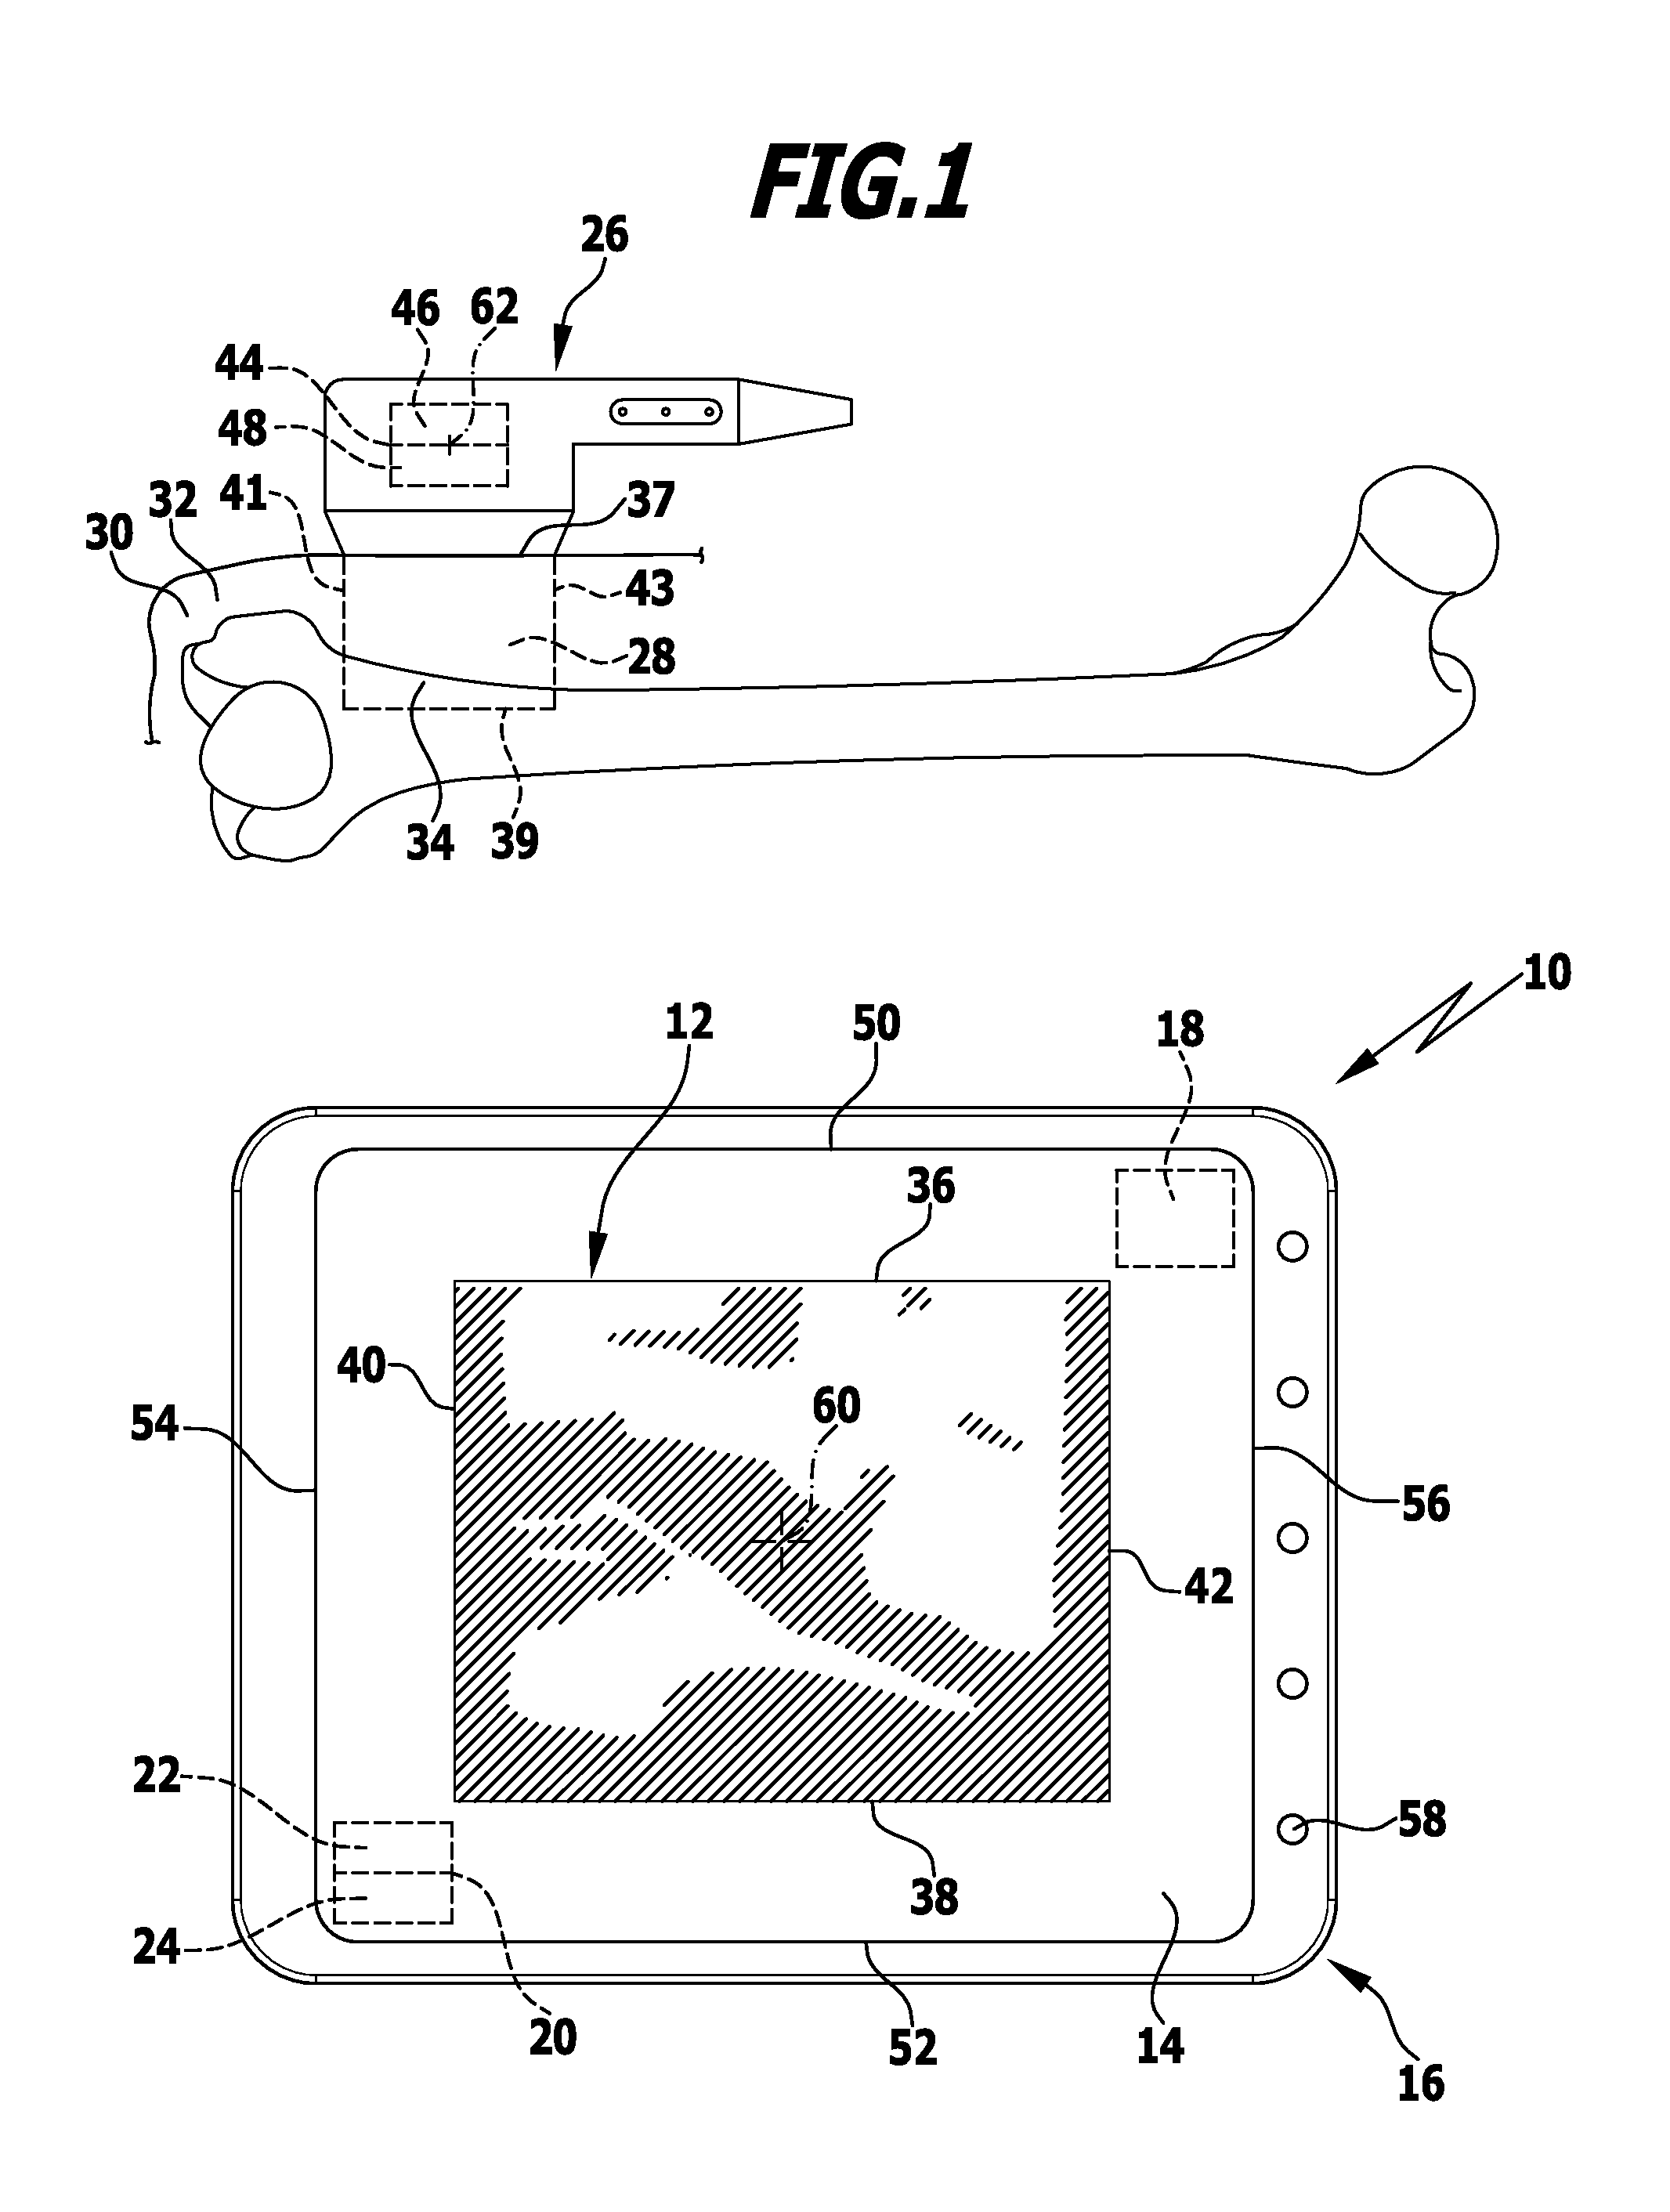 Method and apparatus for displaying an ultrasound image